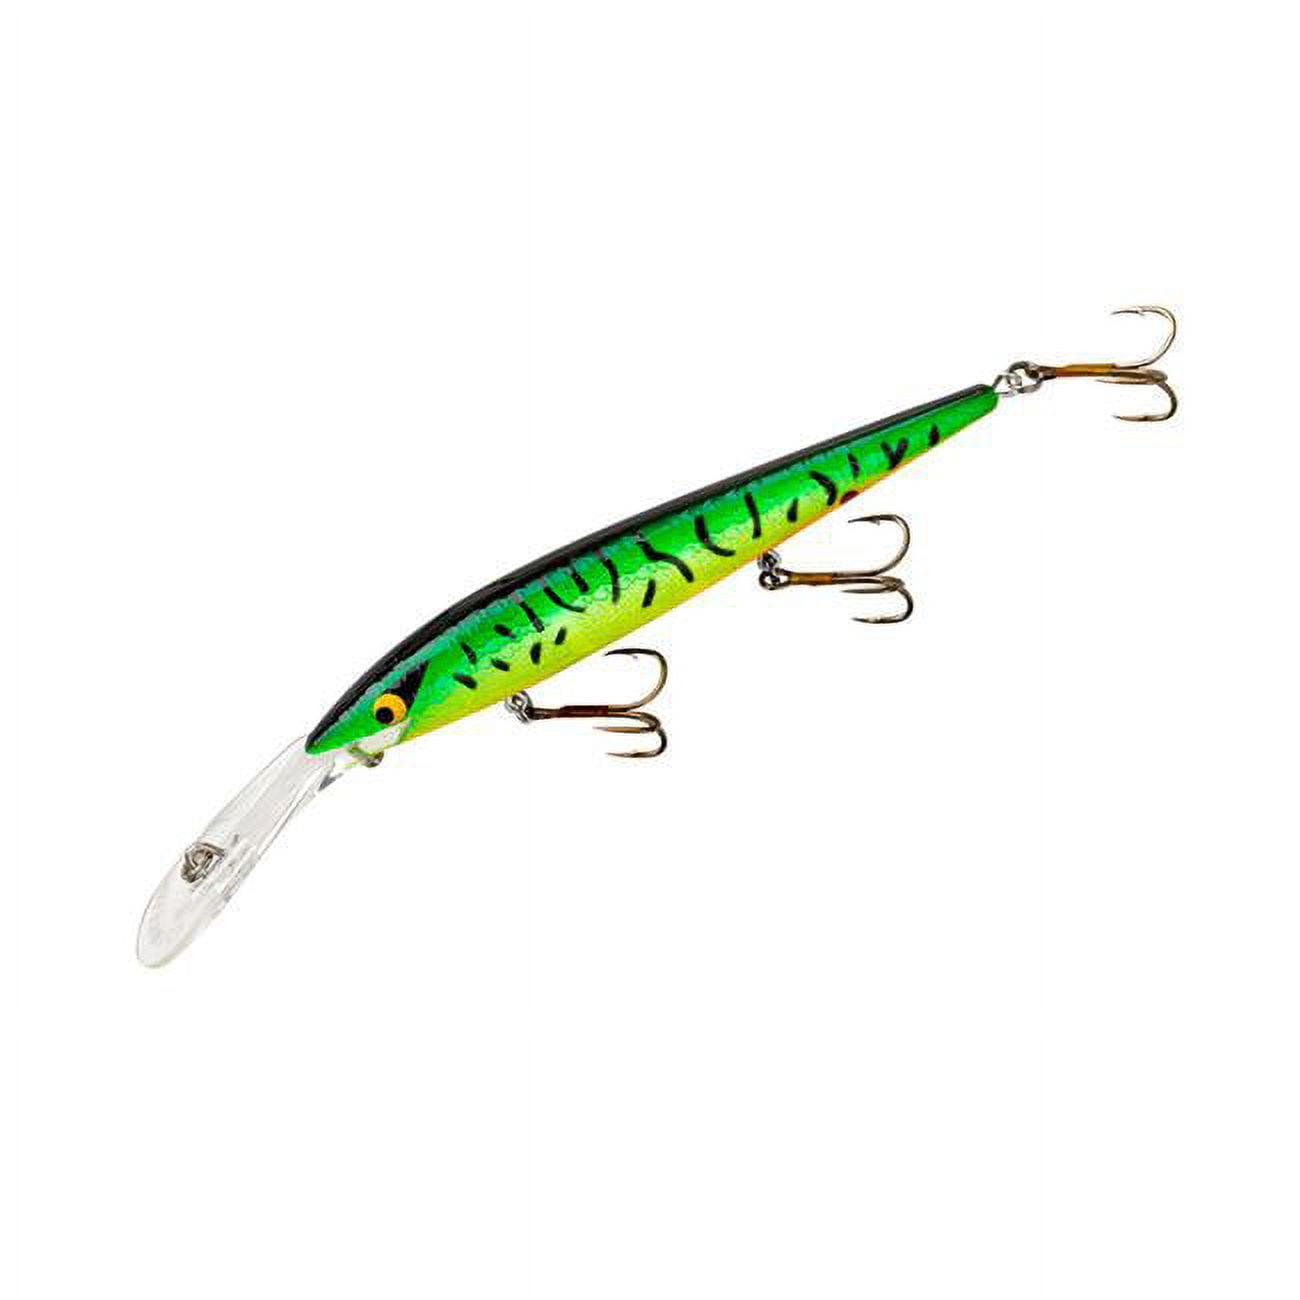 Smithwick ASSRB1207 Deep Suspended Rogue-Tiger Roan Fishing Lure 